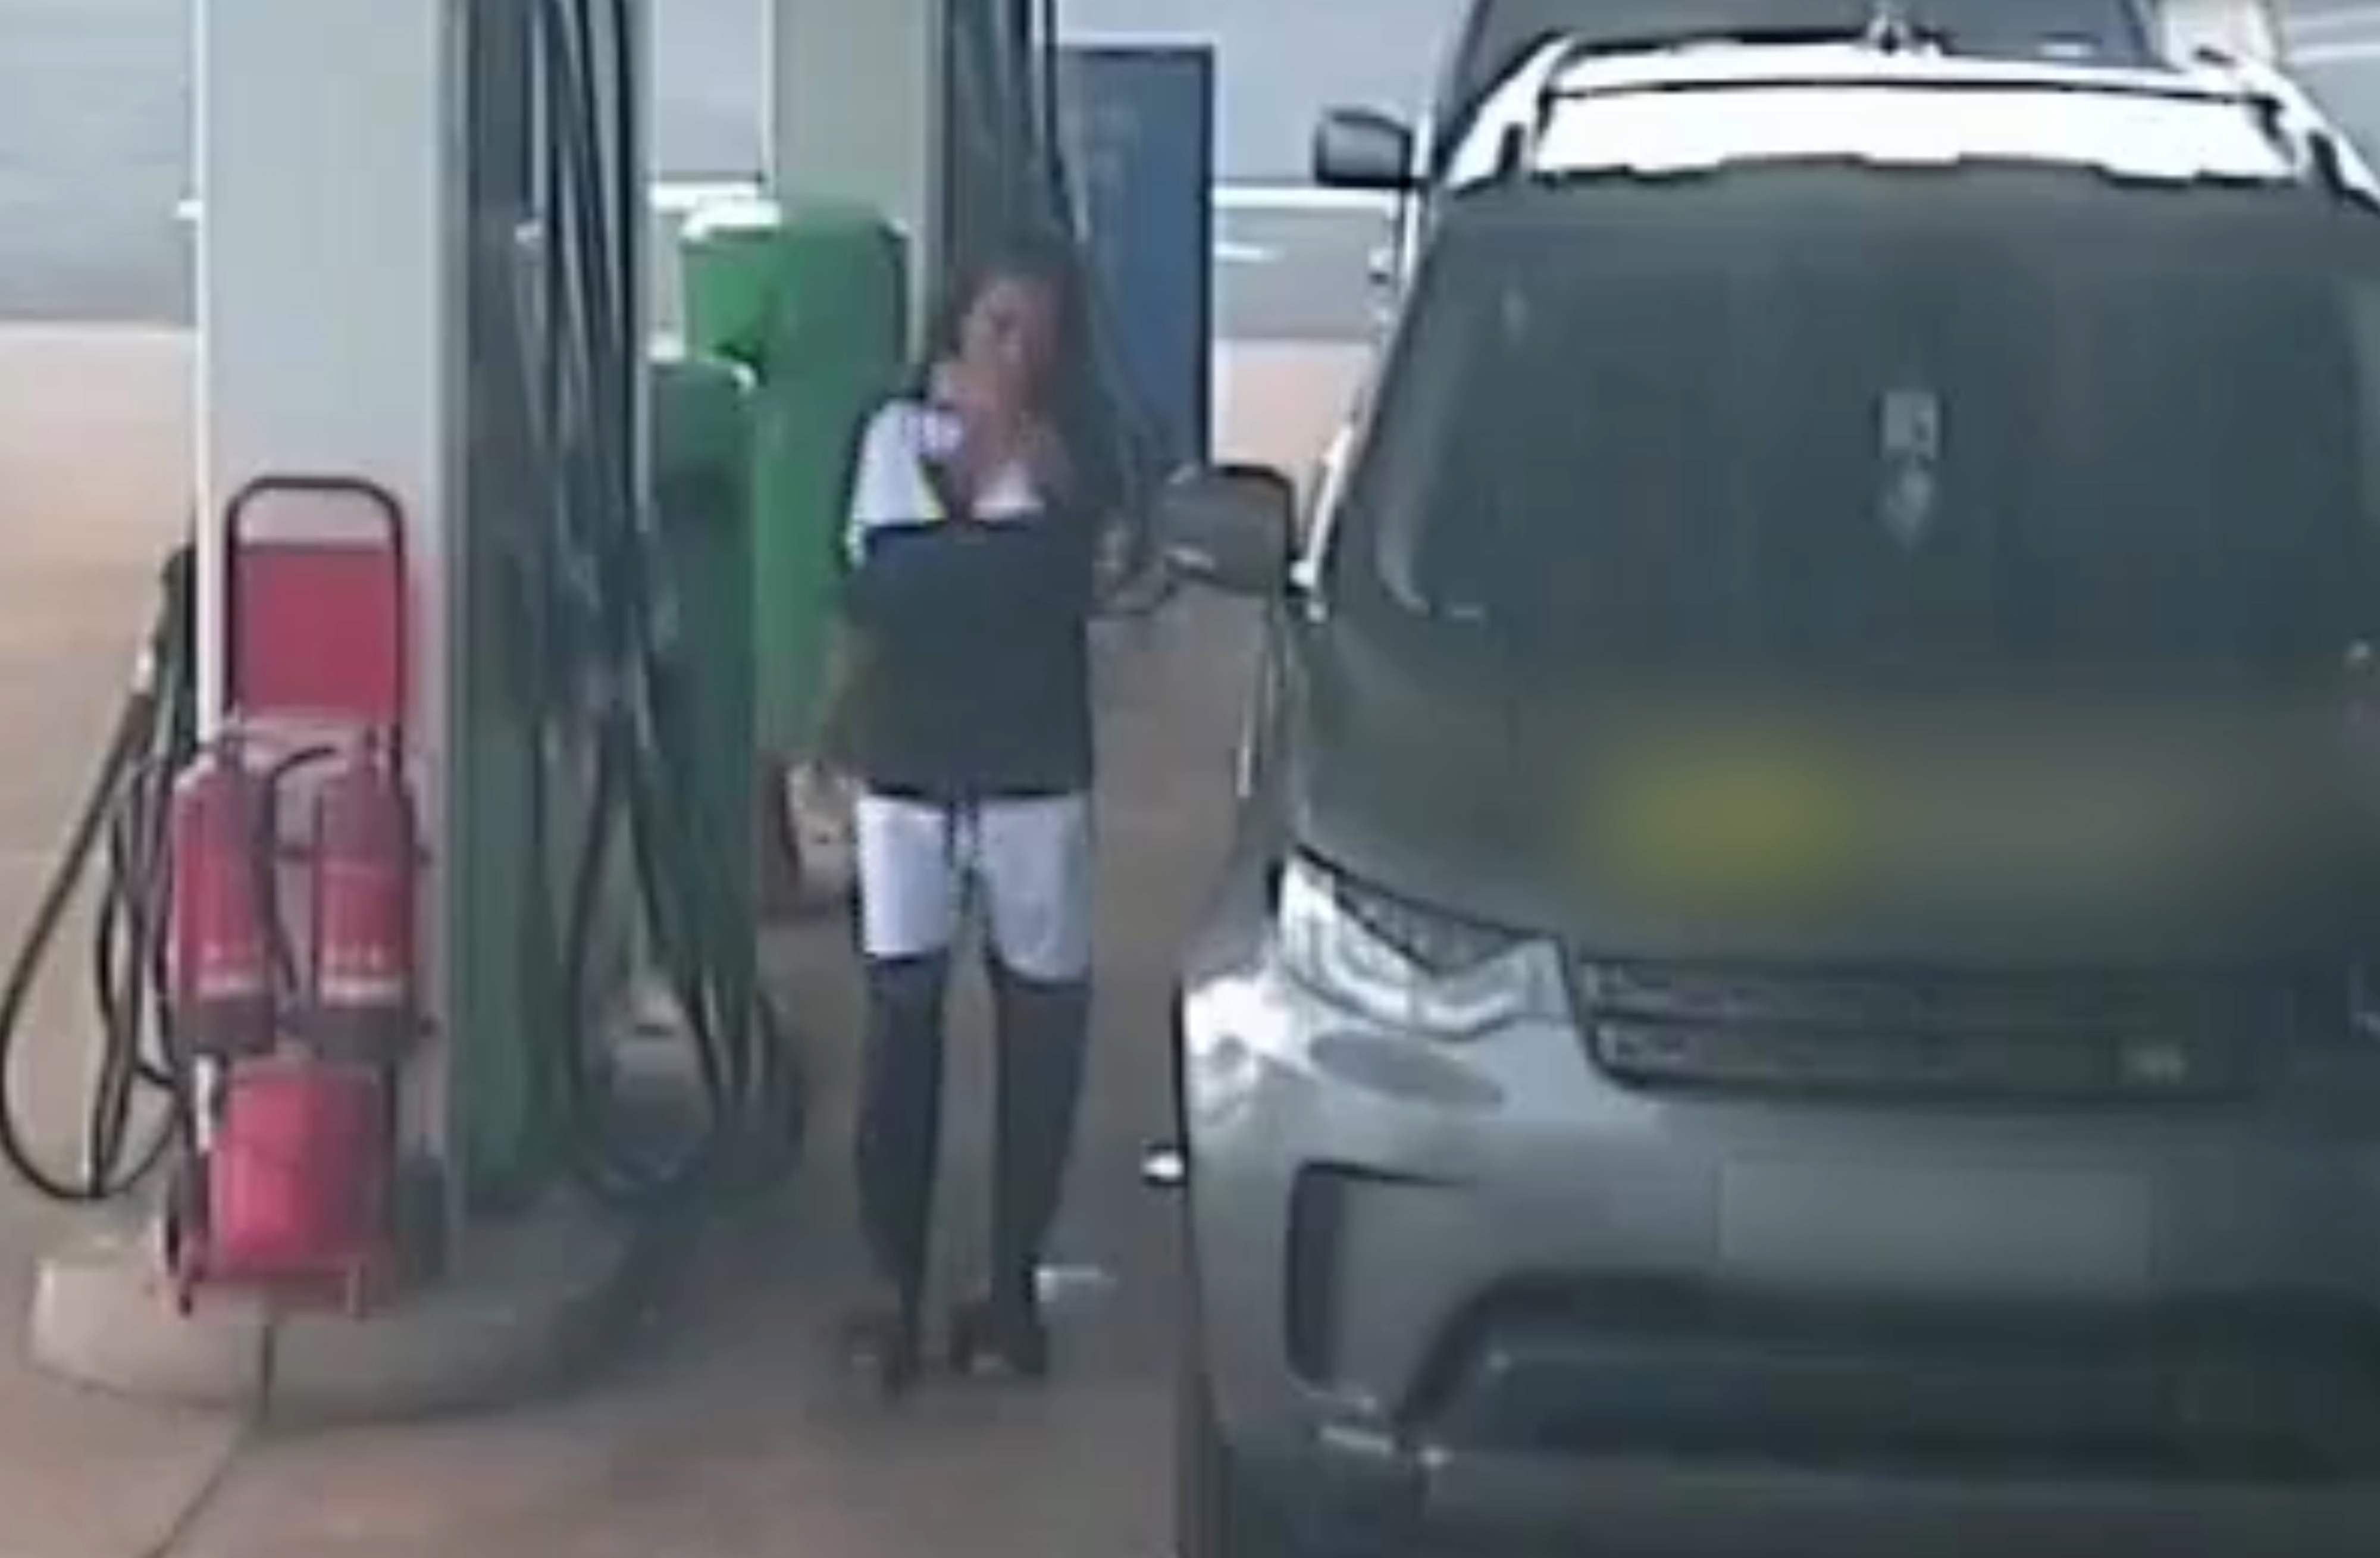 Katie was previously captured on CCTV leaving her gold Range Rover while at a M&S petrol garage in Kettering